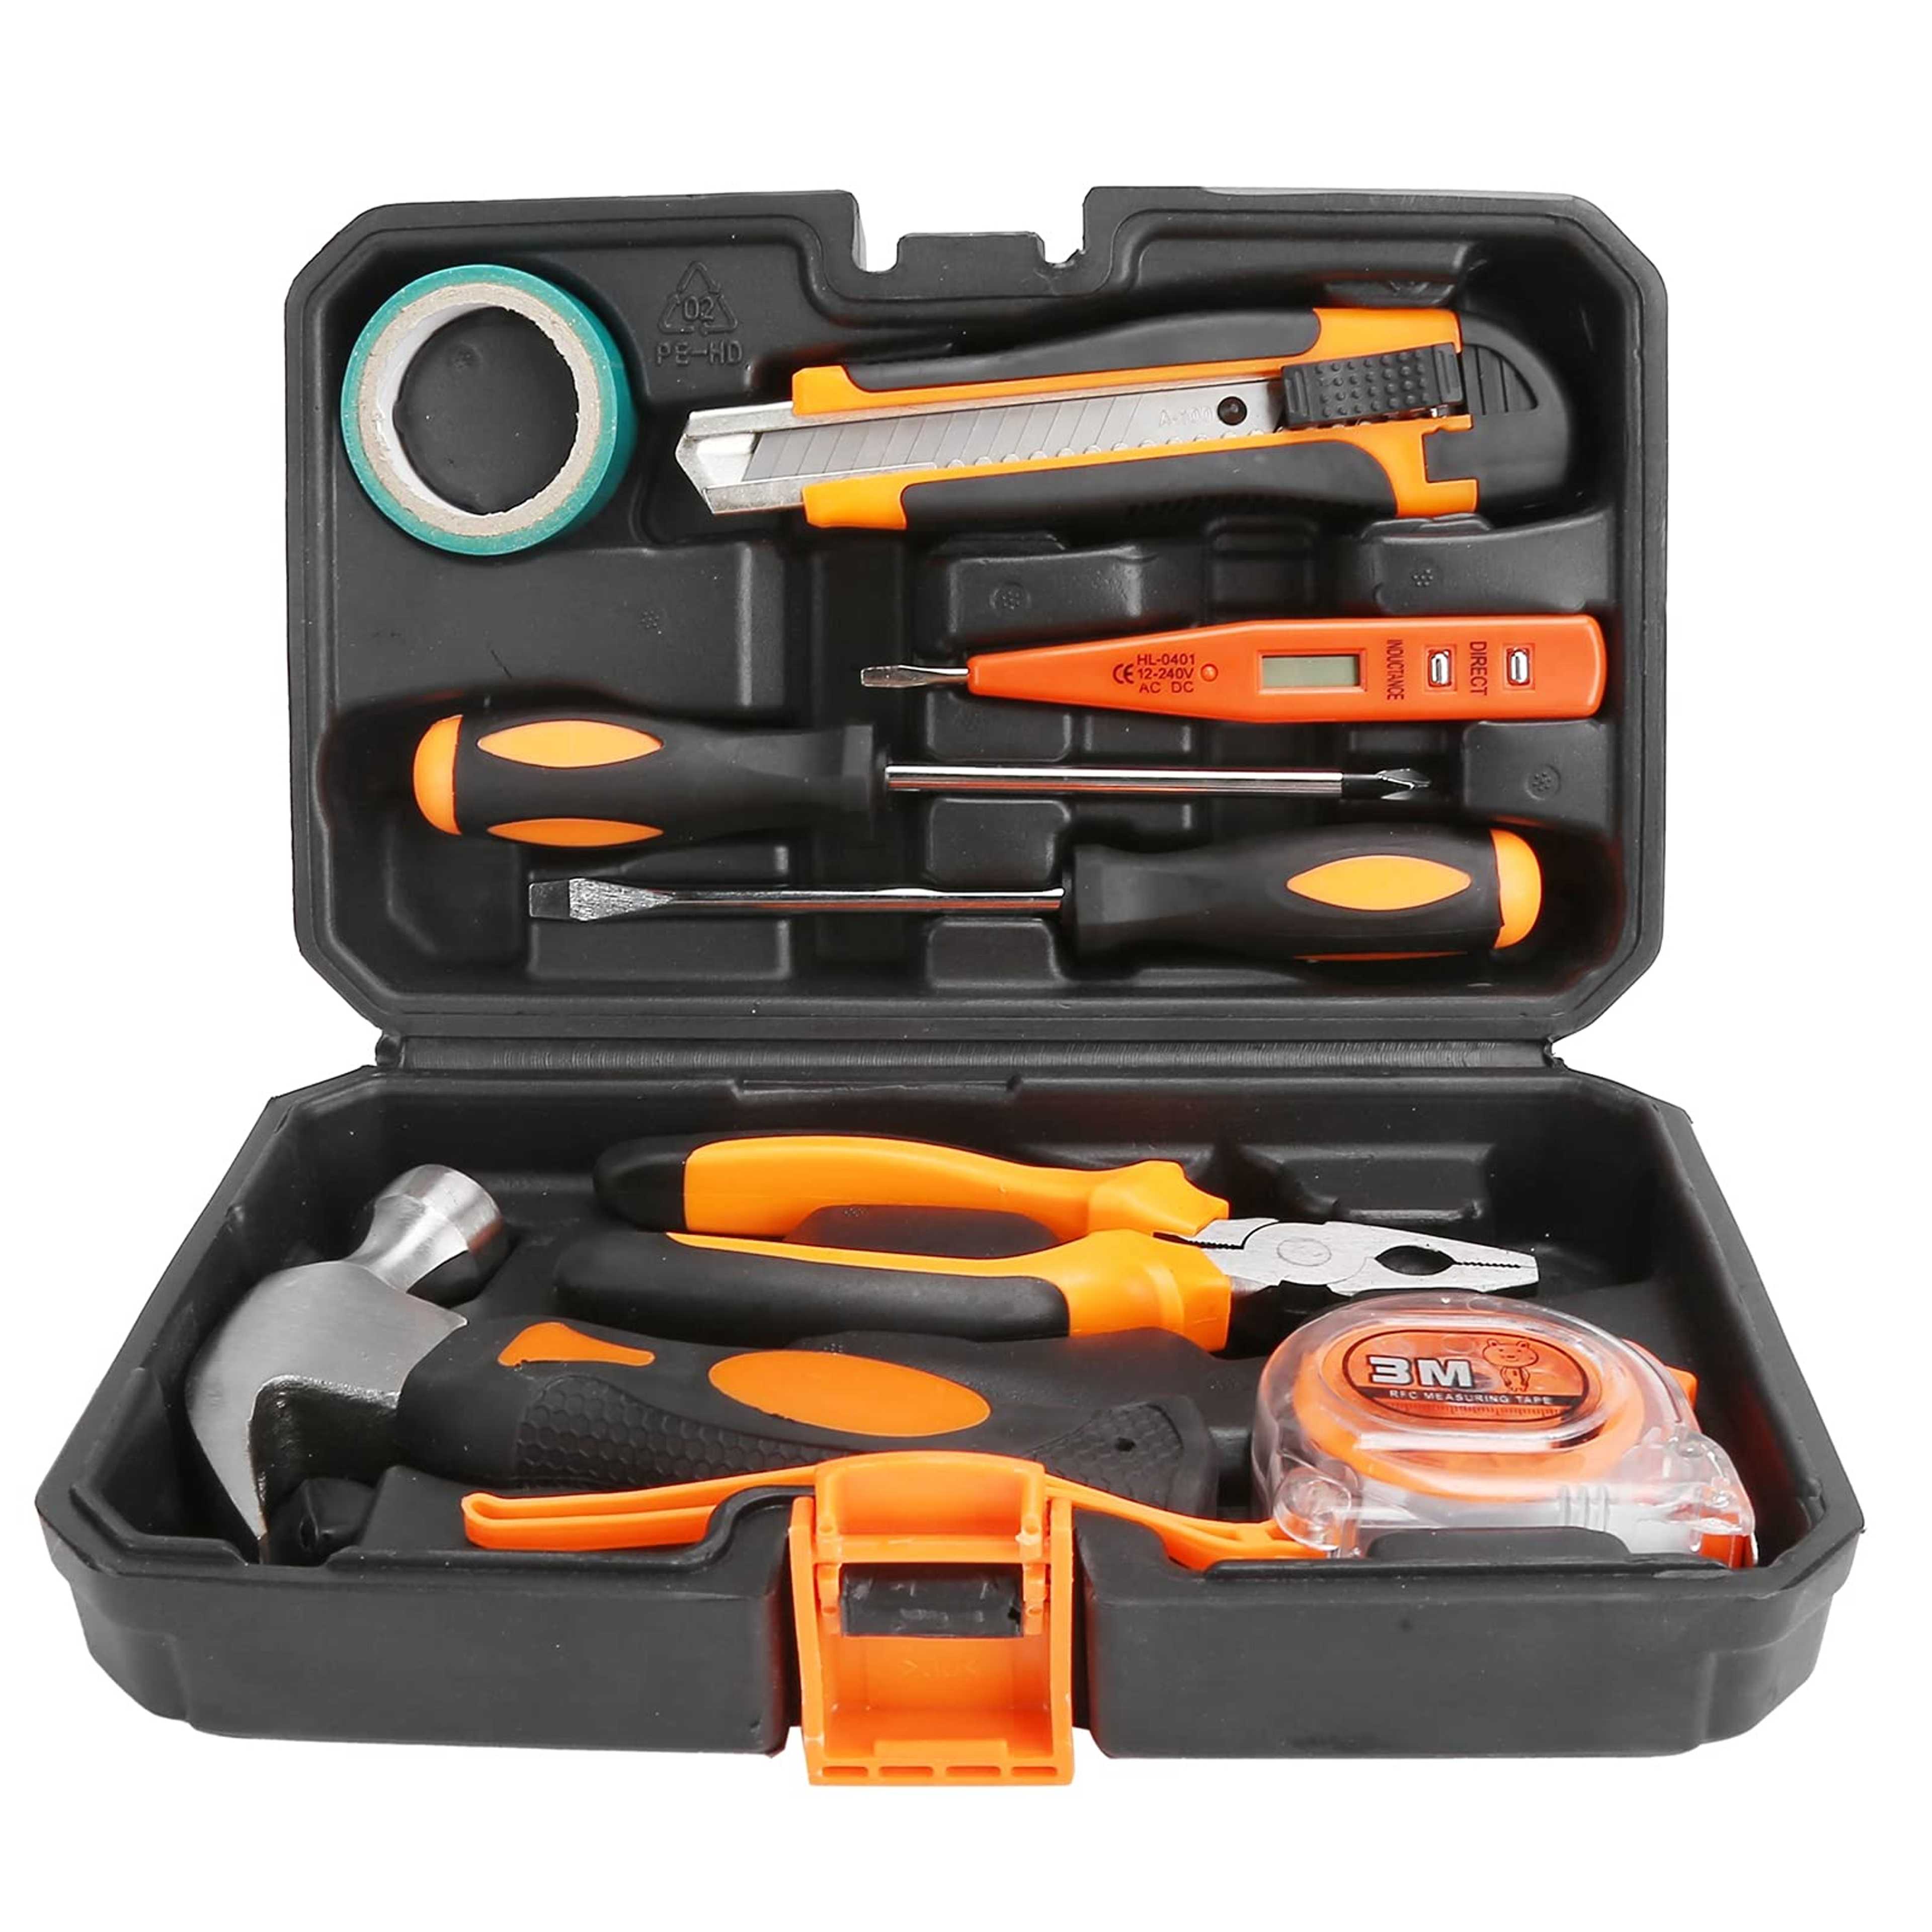 9Pcs Household Hand Tool Kit - Mechanic Tool Set Home Repair Tool Kit with Storage Case Screwdriver Wire Pliers Hammer Utility Knife Set Hardware Tool Kit for DIY Projects/Homeowner/Handyman